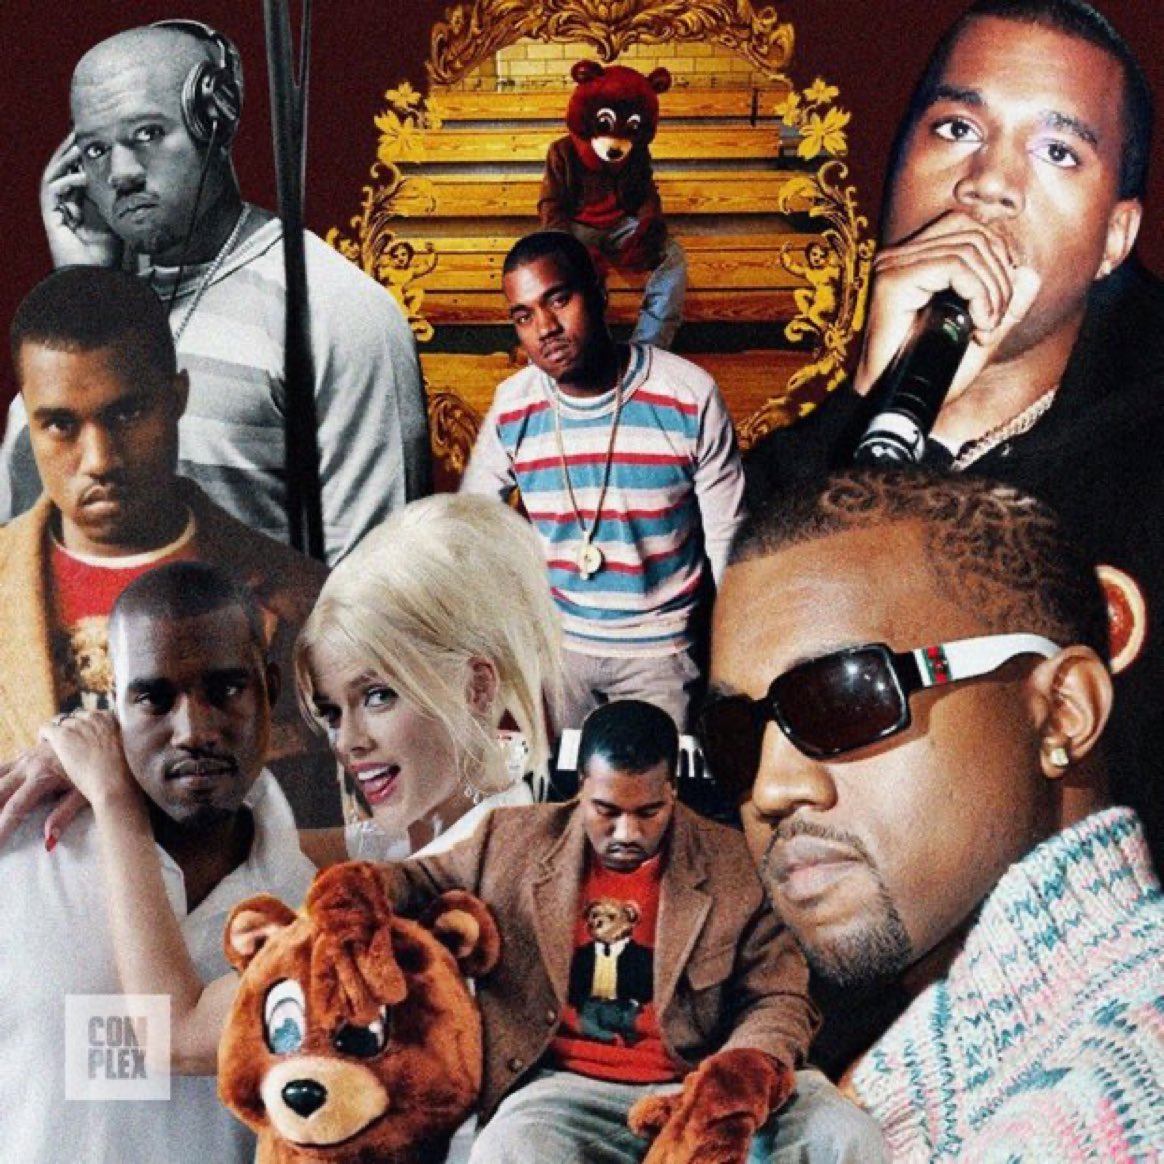 Kanye West released ‘The College Dropout’ 19 years ago today